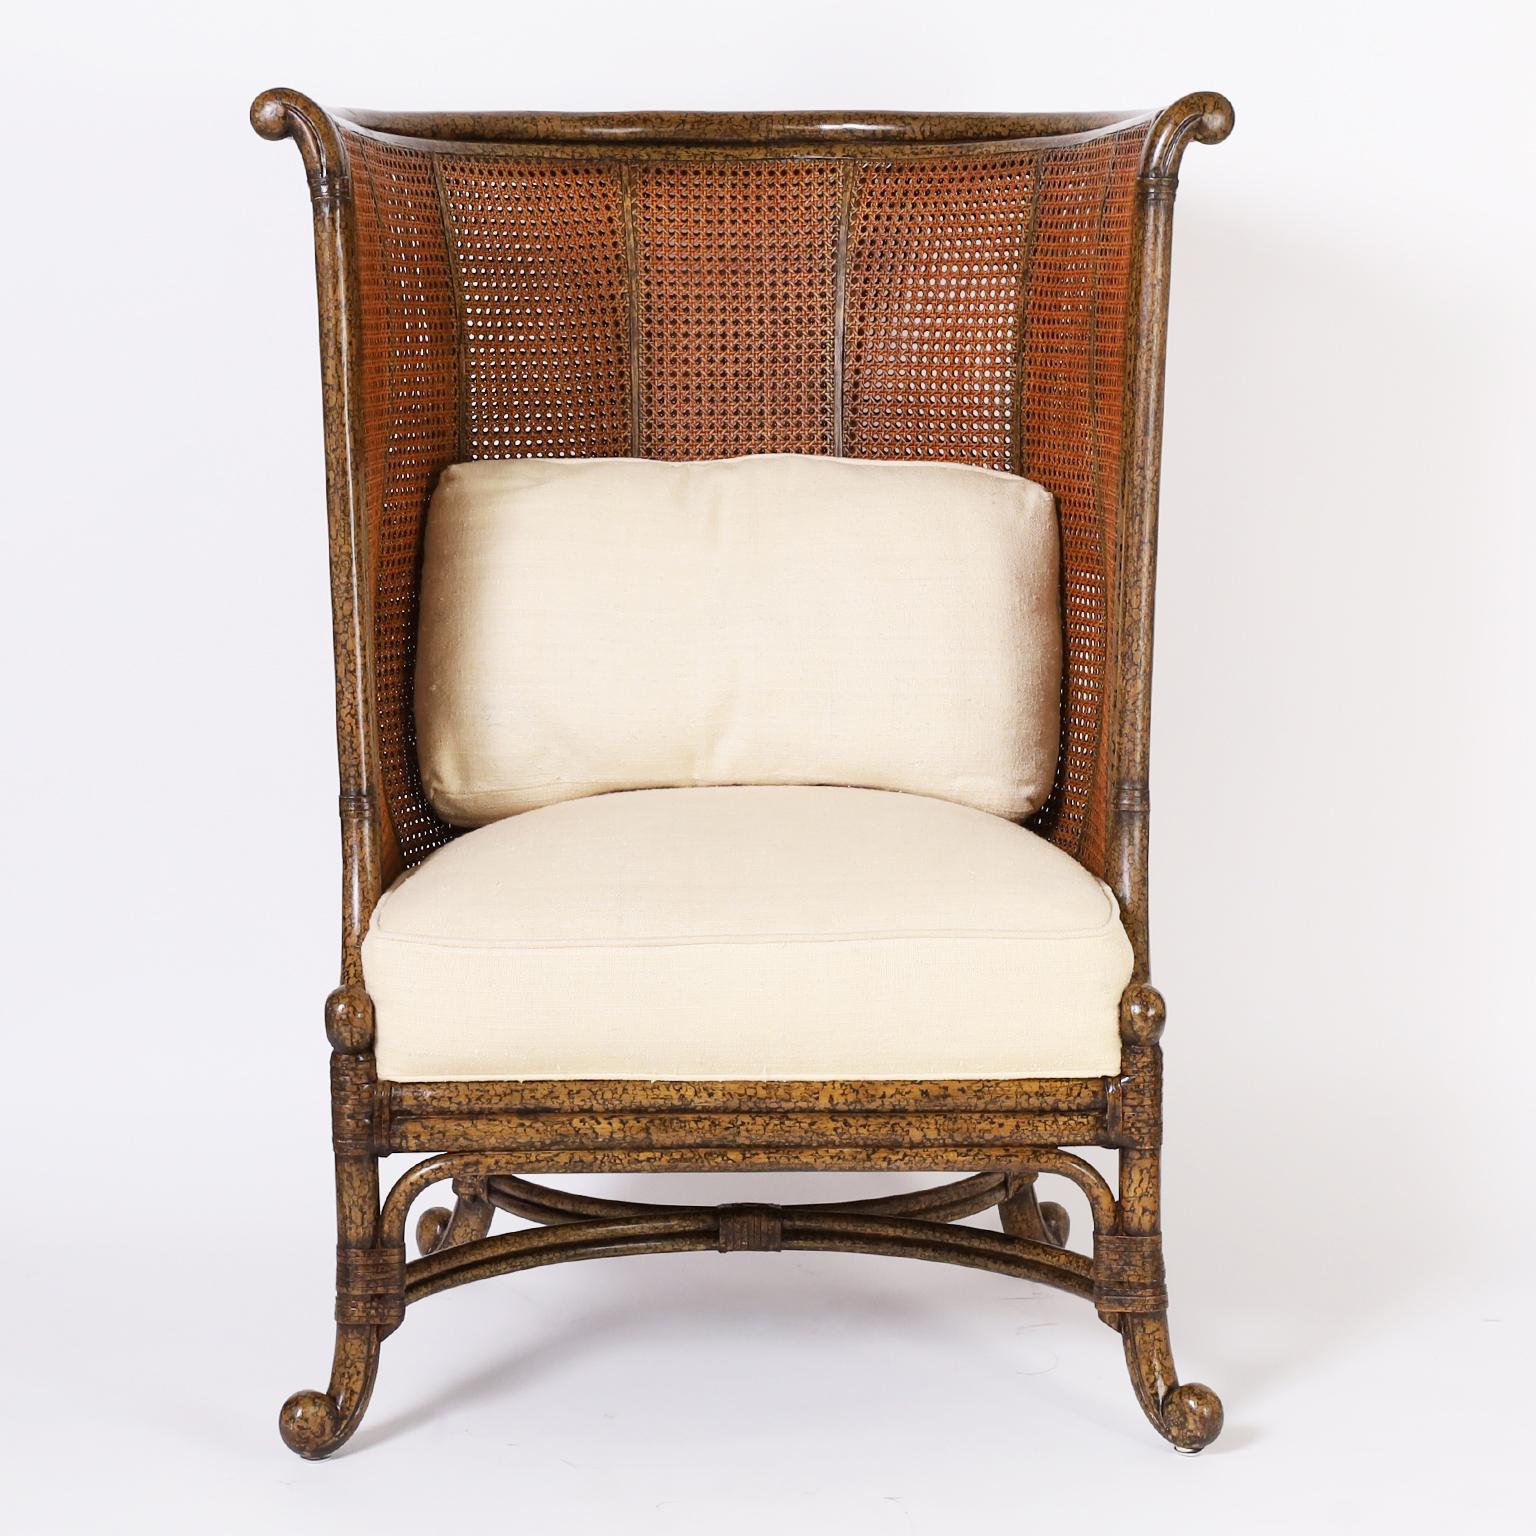 Standout vintage stylized tropical wingback chair with a faux tortoise frame crafted in hardwood, double caned sides and back, upholstered seat, reed wrapped joints and rolled feet.